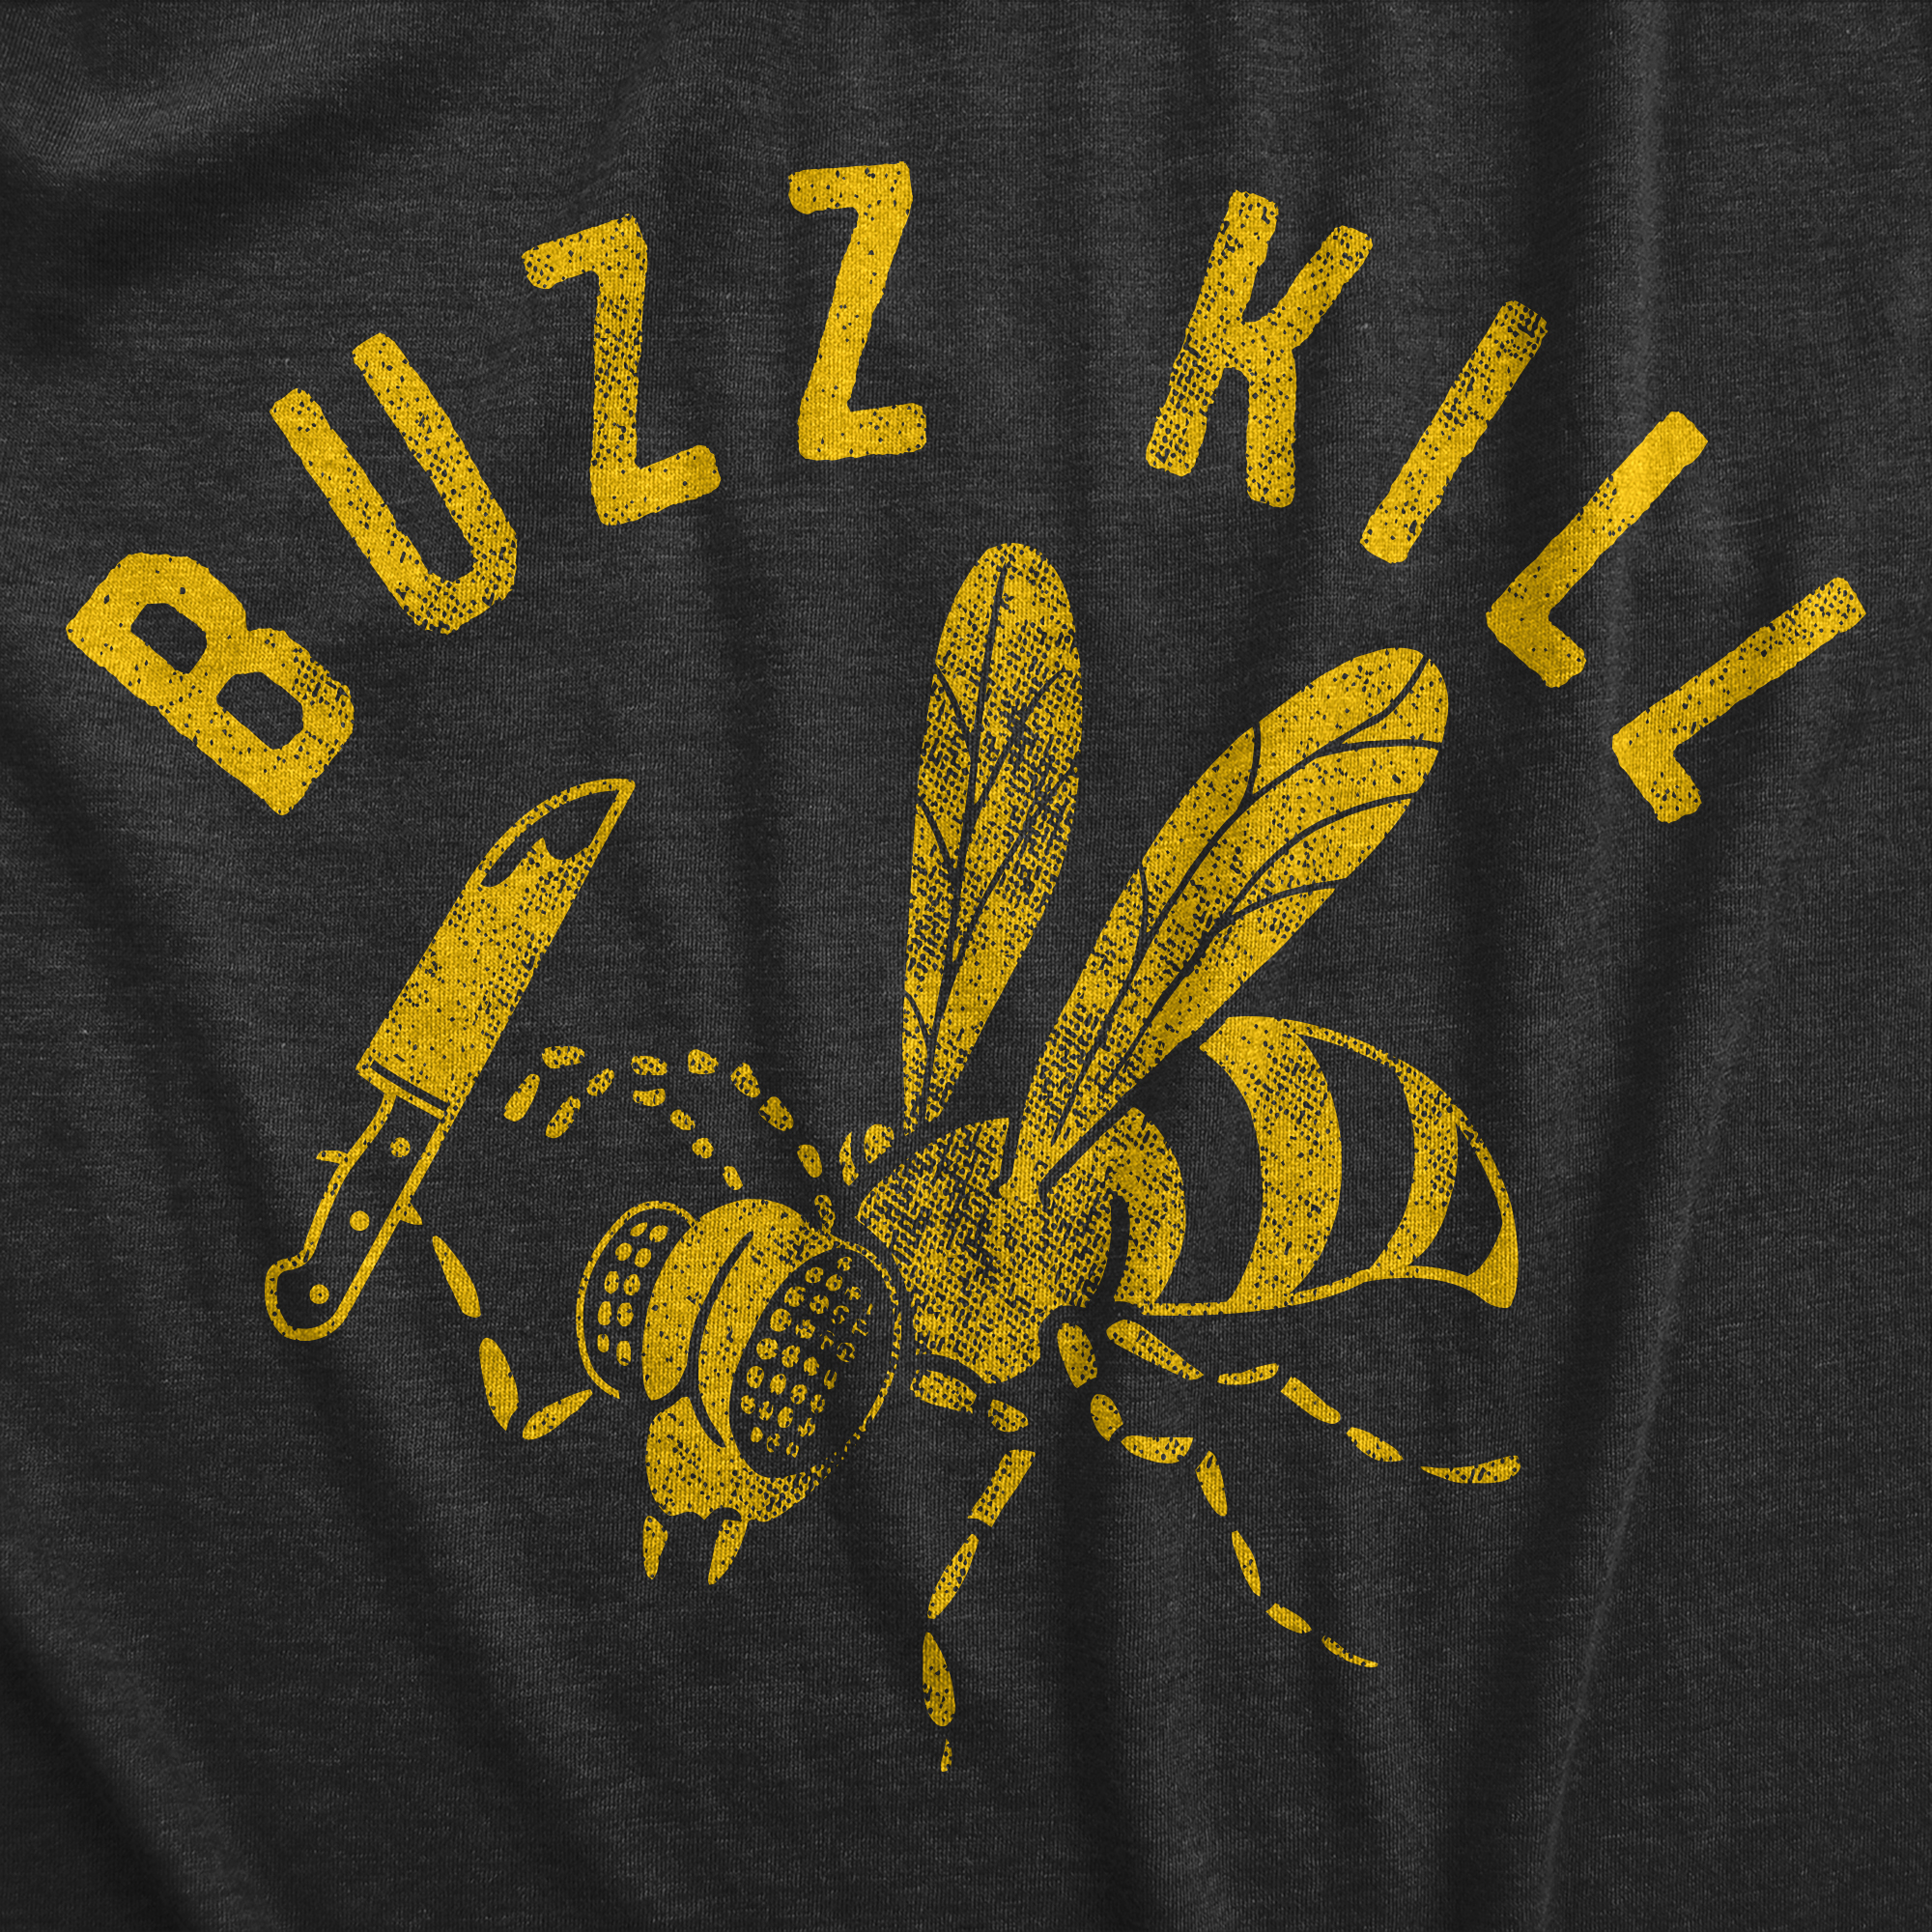 Crazy Dog Tshirts Womens Buzzkill T Shirt Funny Sarcastic Killer Bee Joke  Knife Graphic Tee For